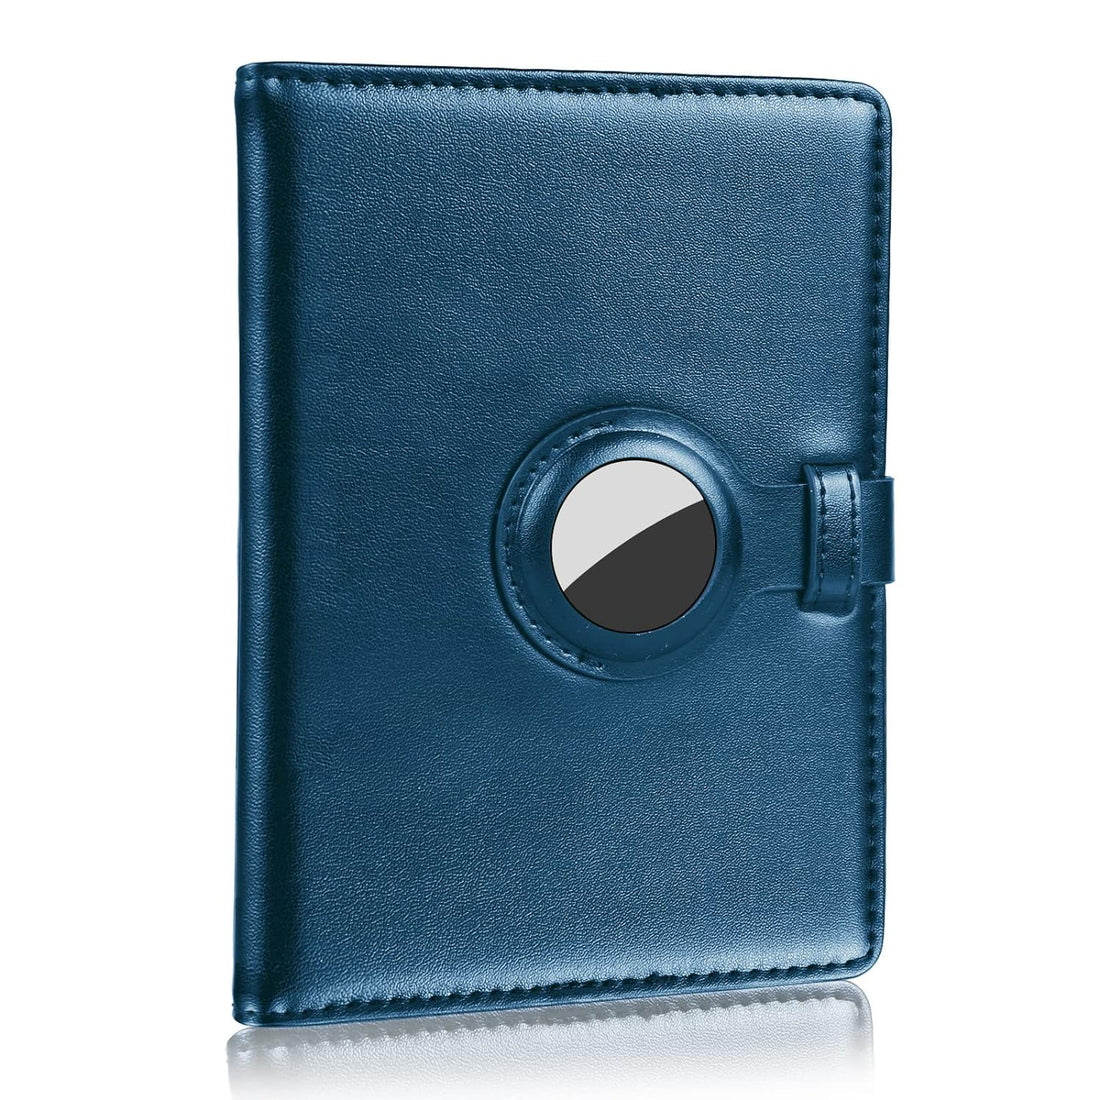 Airtag Passport Holder, Airtag Wallet Passport Holder and Vaccine Card Holder with Airtag for Unisex Adults(Color:C2,Size:21.5*14cm), Blue, 21.5*14cm, Minimalist